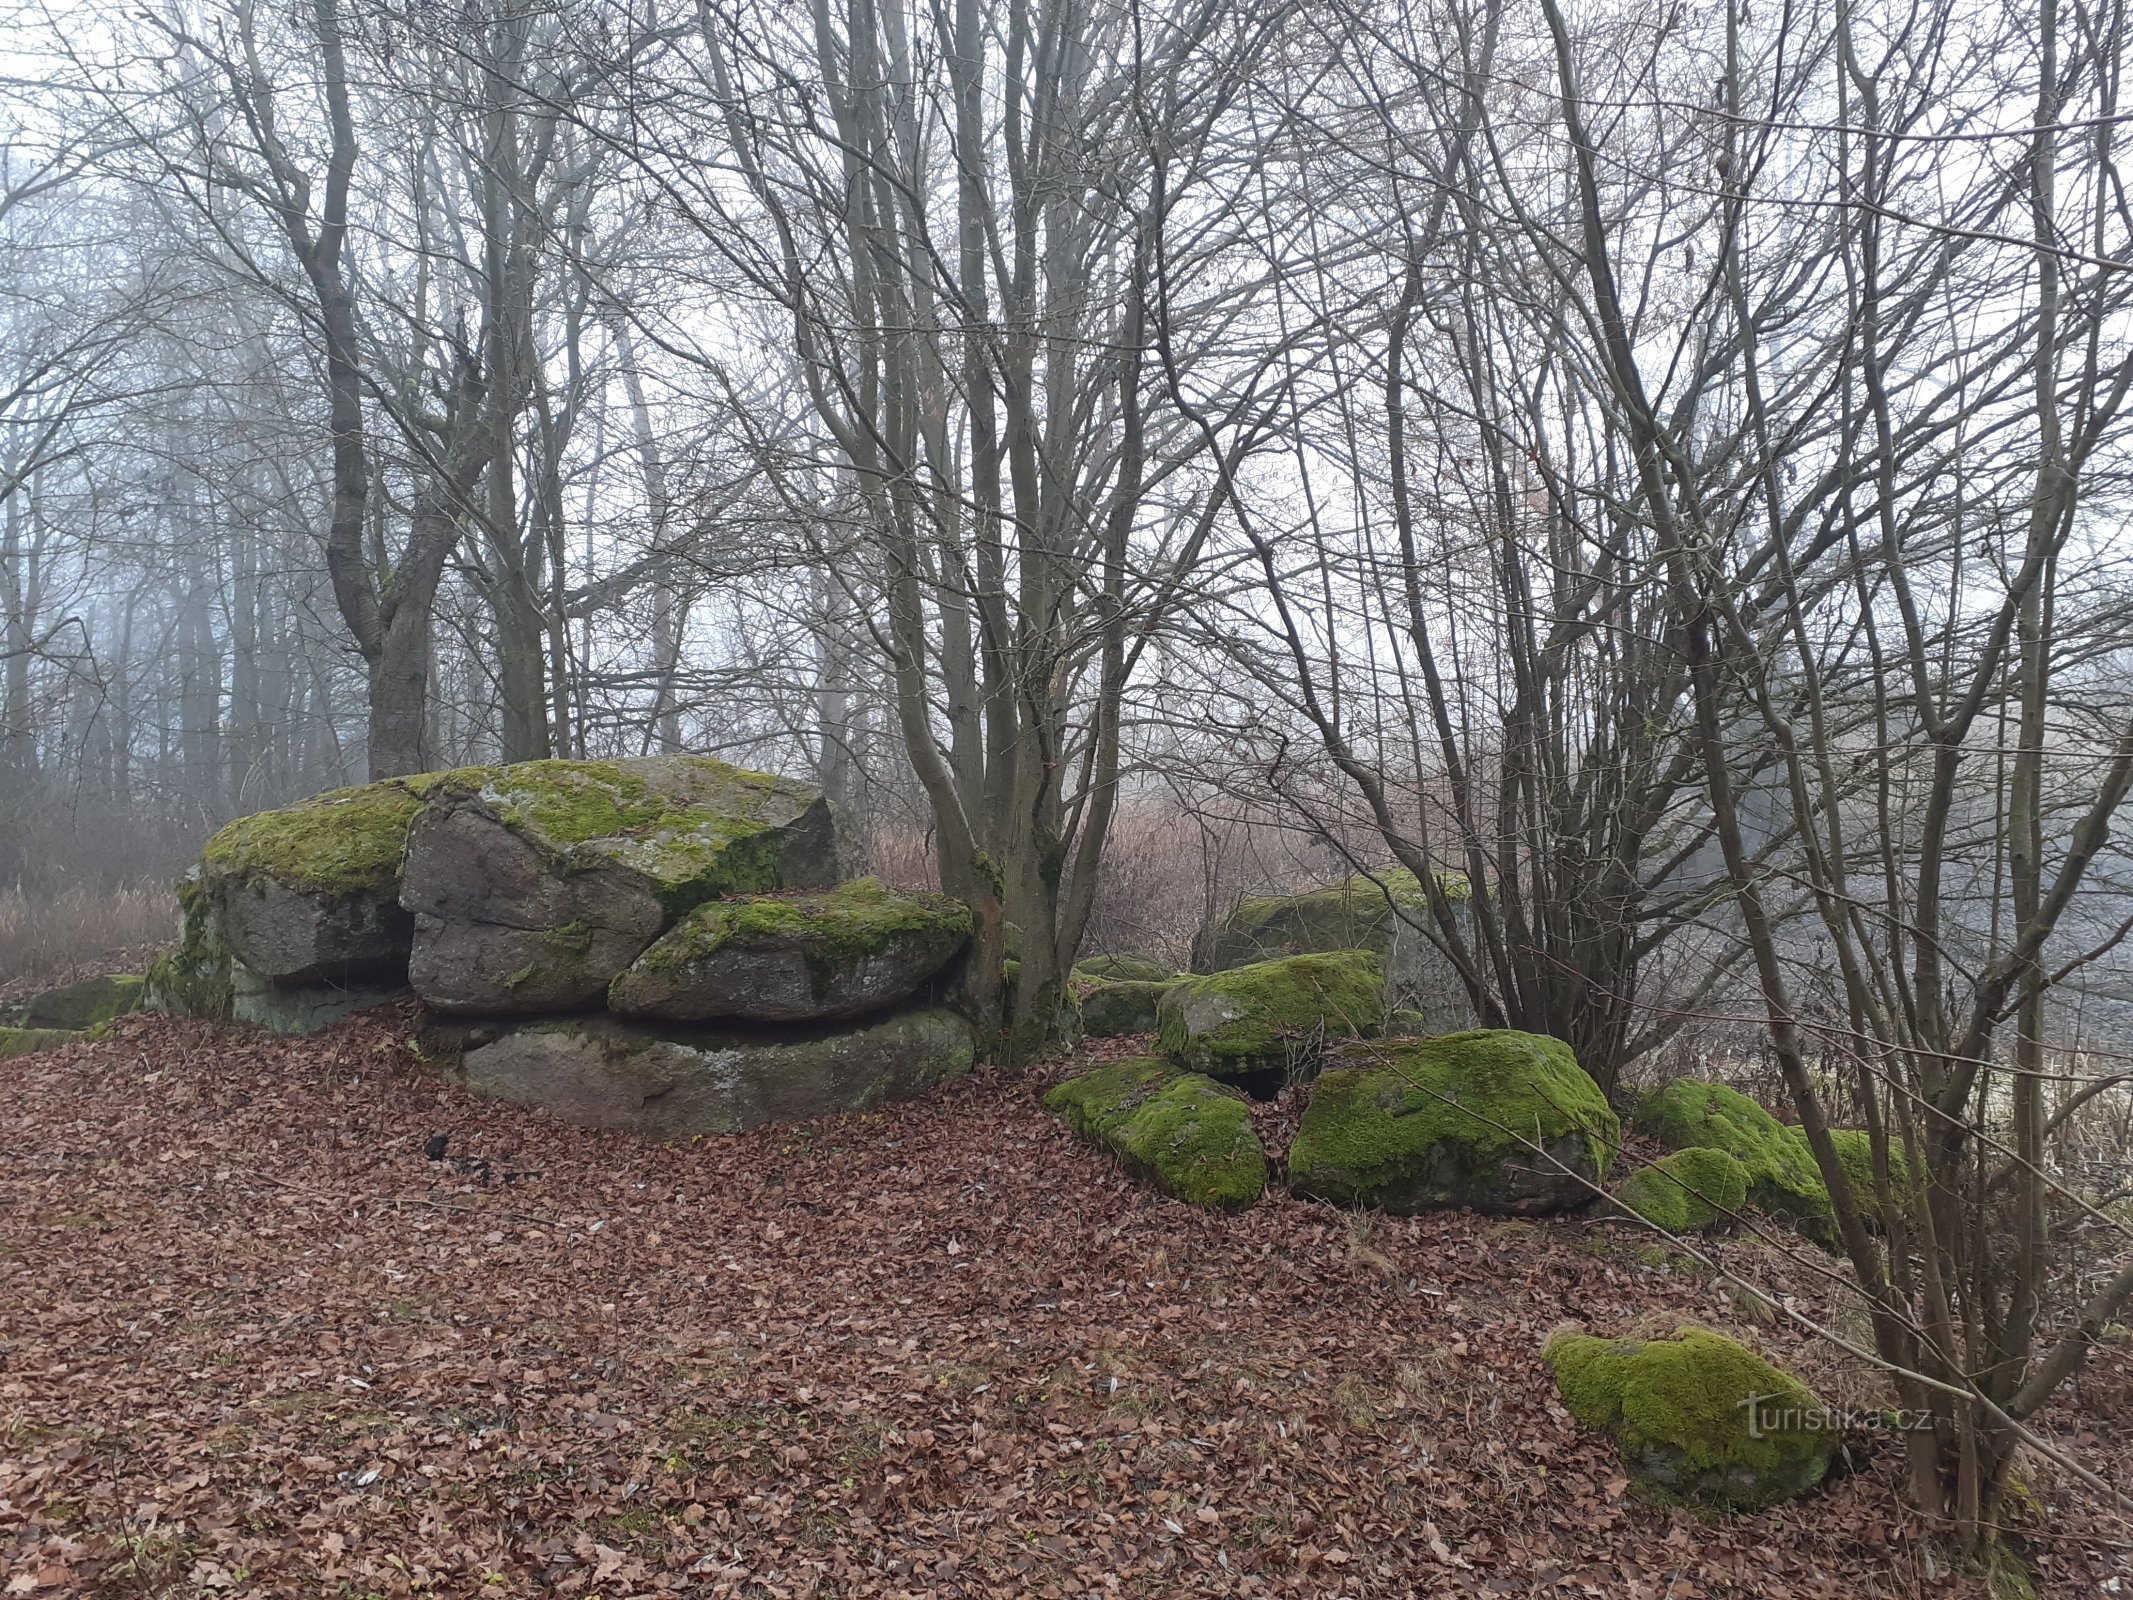 grouping of boulders by the pond